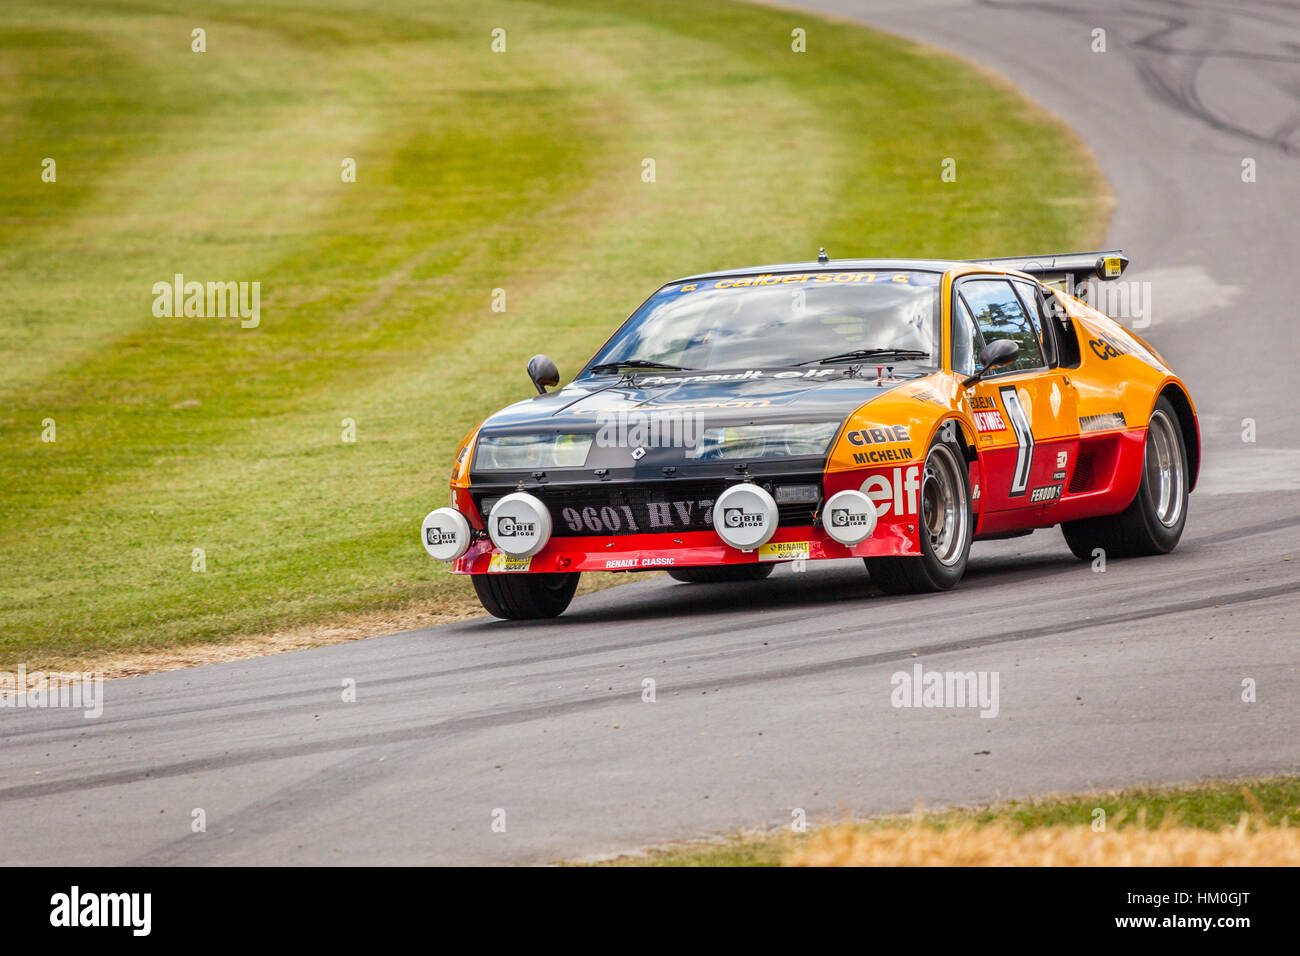 Renault Alpine A310 racing car at Goodwood Festival of Speed 2014 Stock Photo